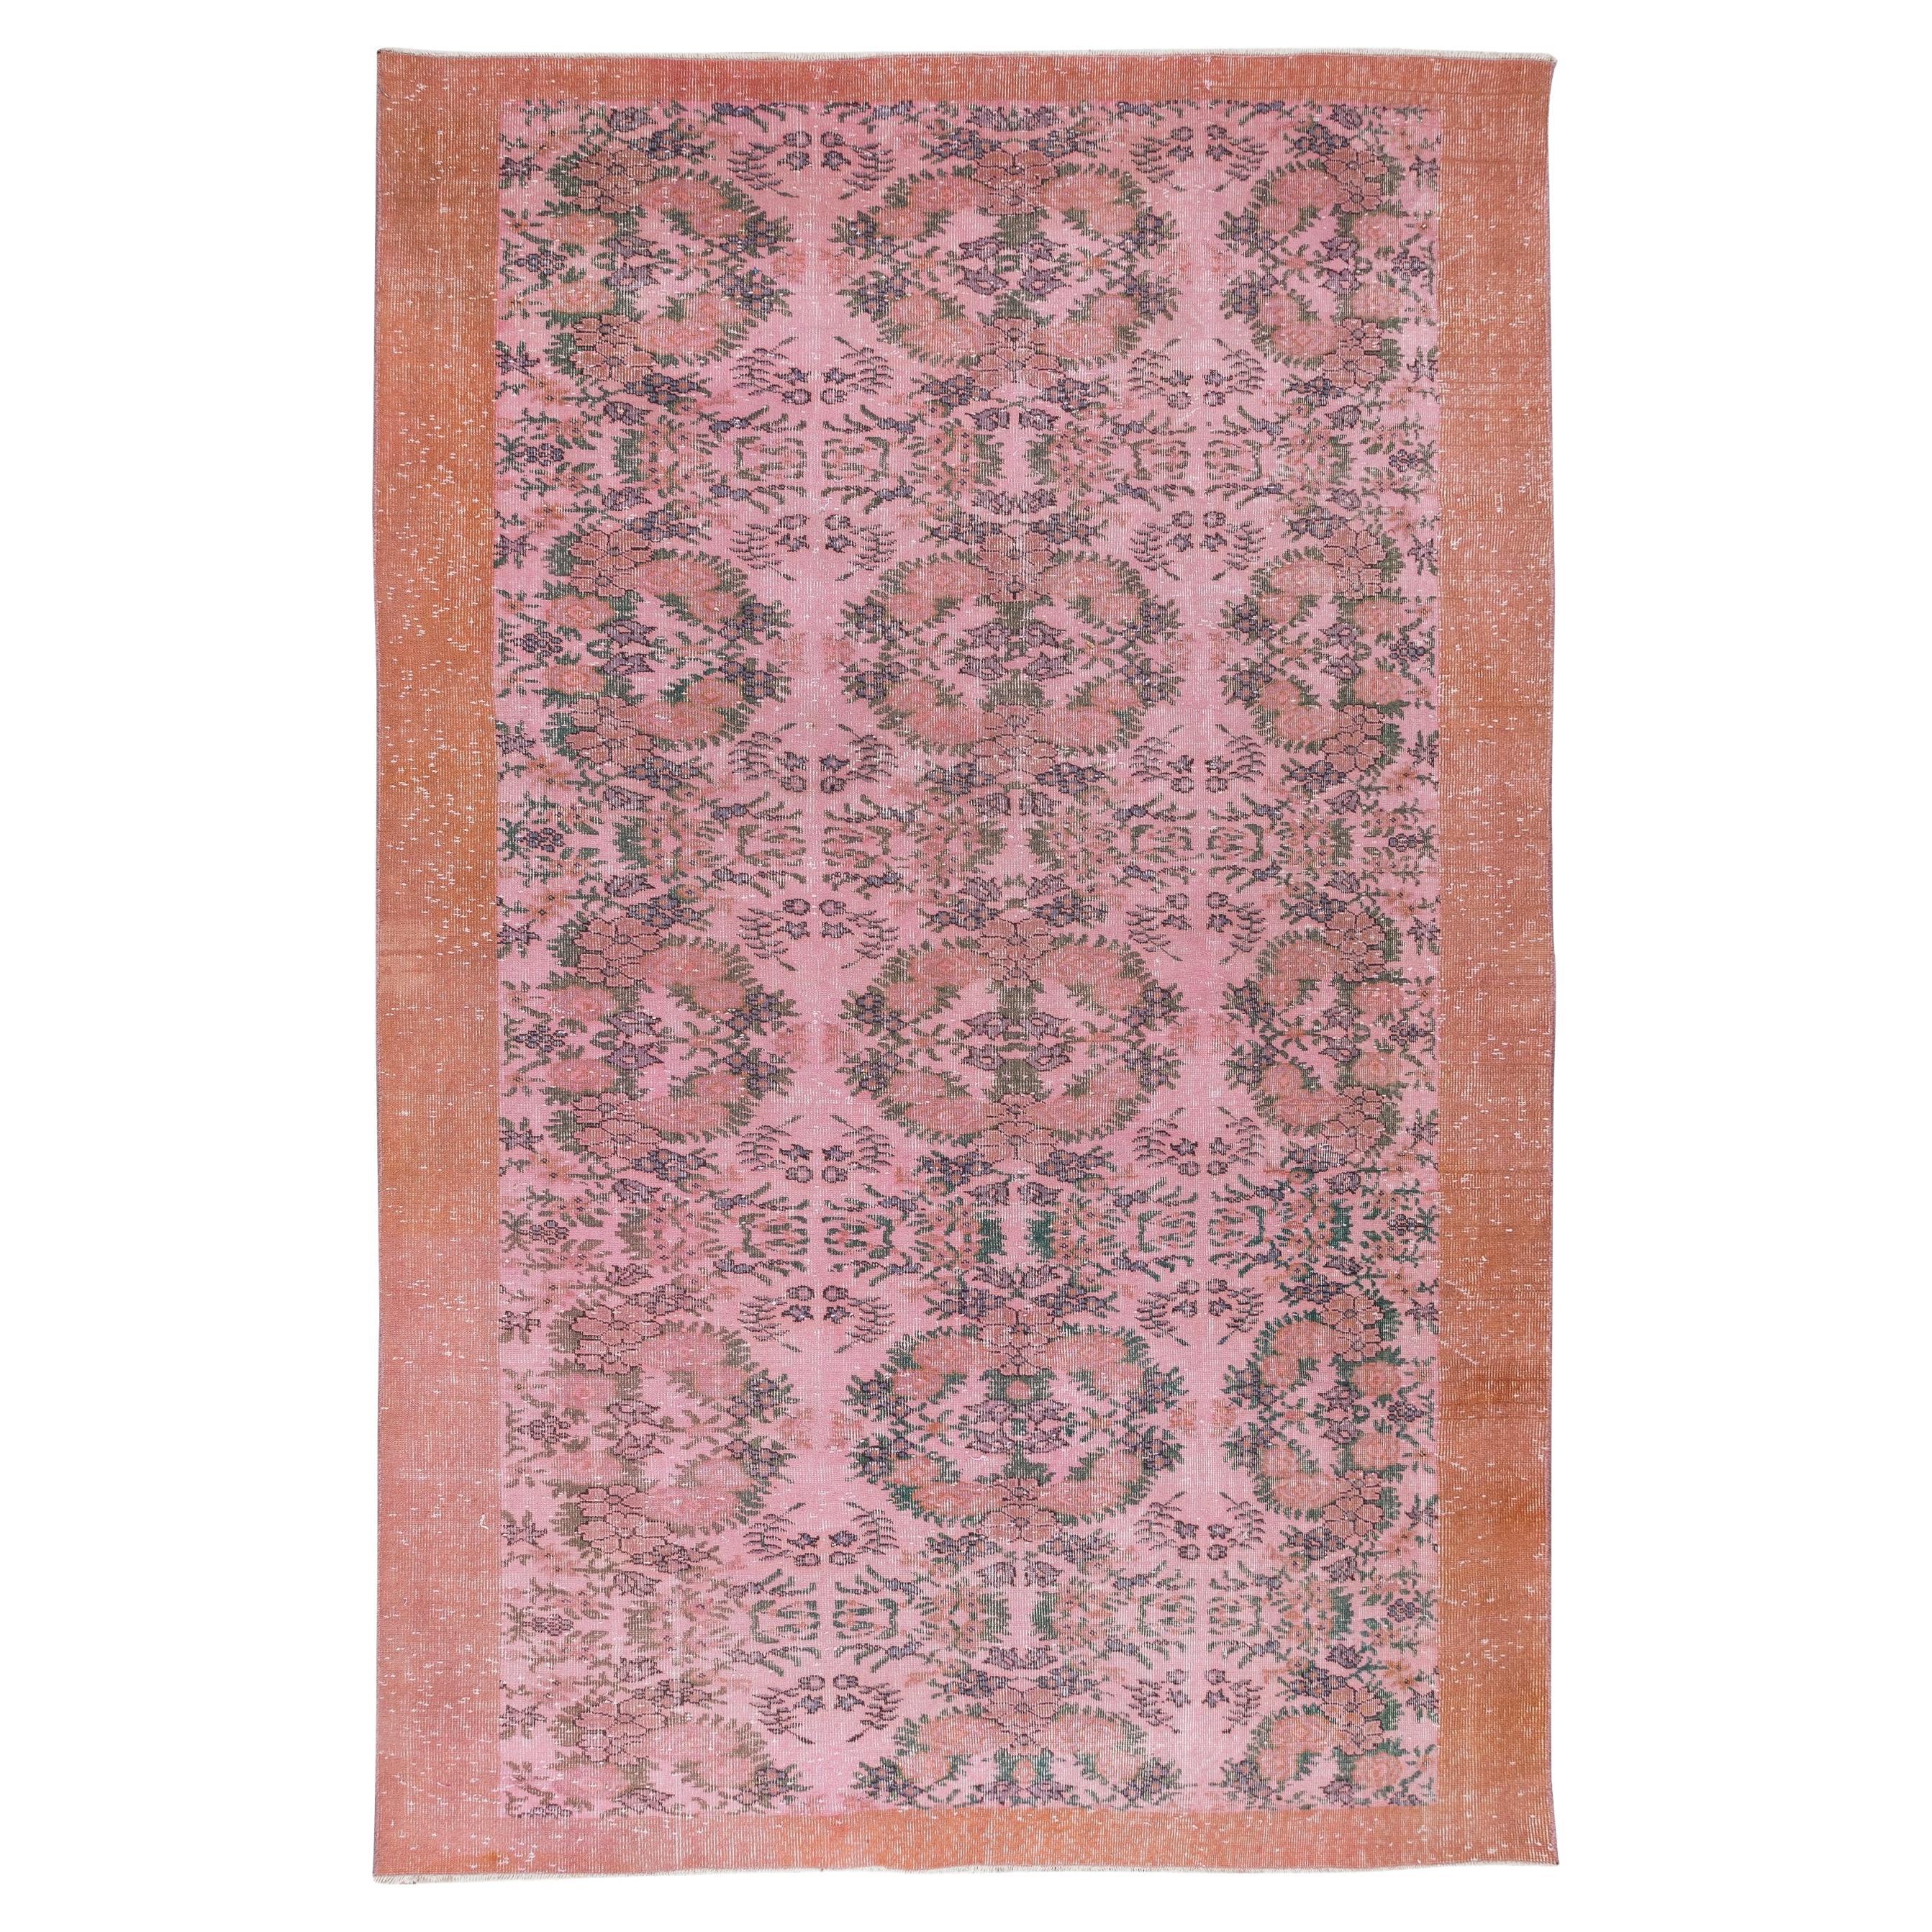 7x10.7 Ft Handmade Floral Pattern Anatolian Area Rug in Pink 4 Modern Interiors For Sale